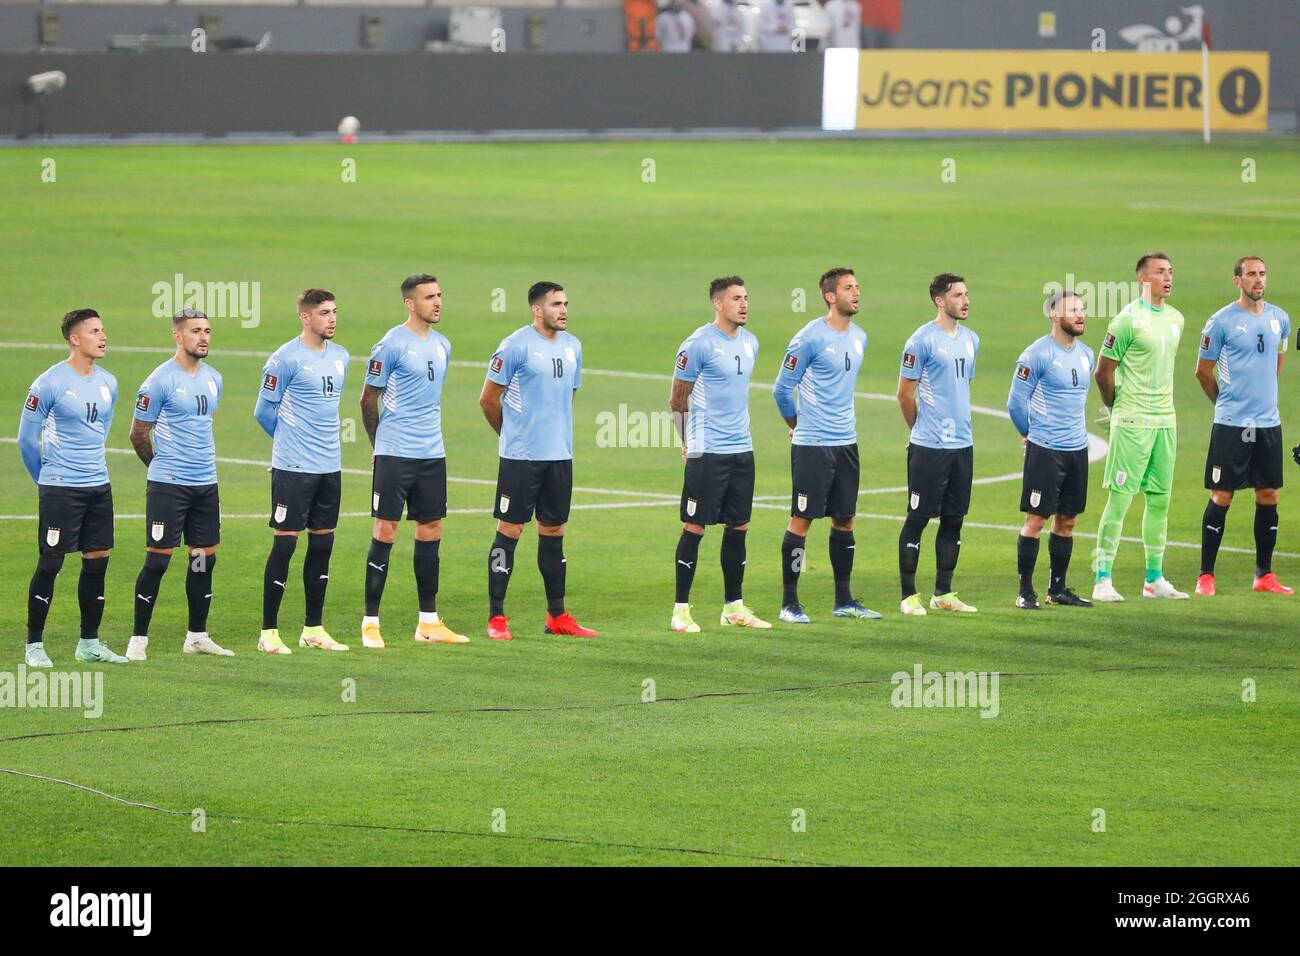 Lima, Peru. 02nd Sep, 2021. Uruguay national team during a match between Peru and Uruguay played at the Estadio Nacional del Peru, in Lima, Peru. Game valid for the 9th round of the South American Qualifiers for the Qatar World Cup 2022. Credit: Ricardo Moreira/FotoArena/Alamy Live News Stock Photo